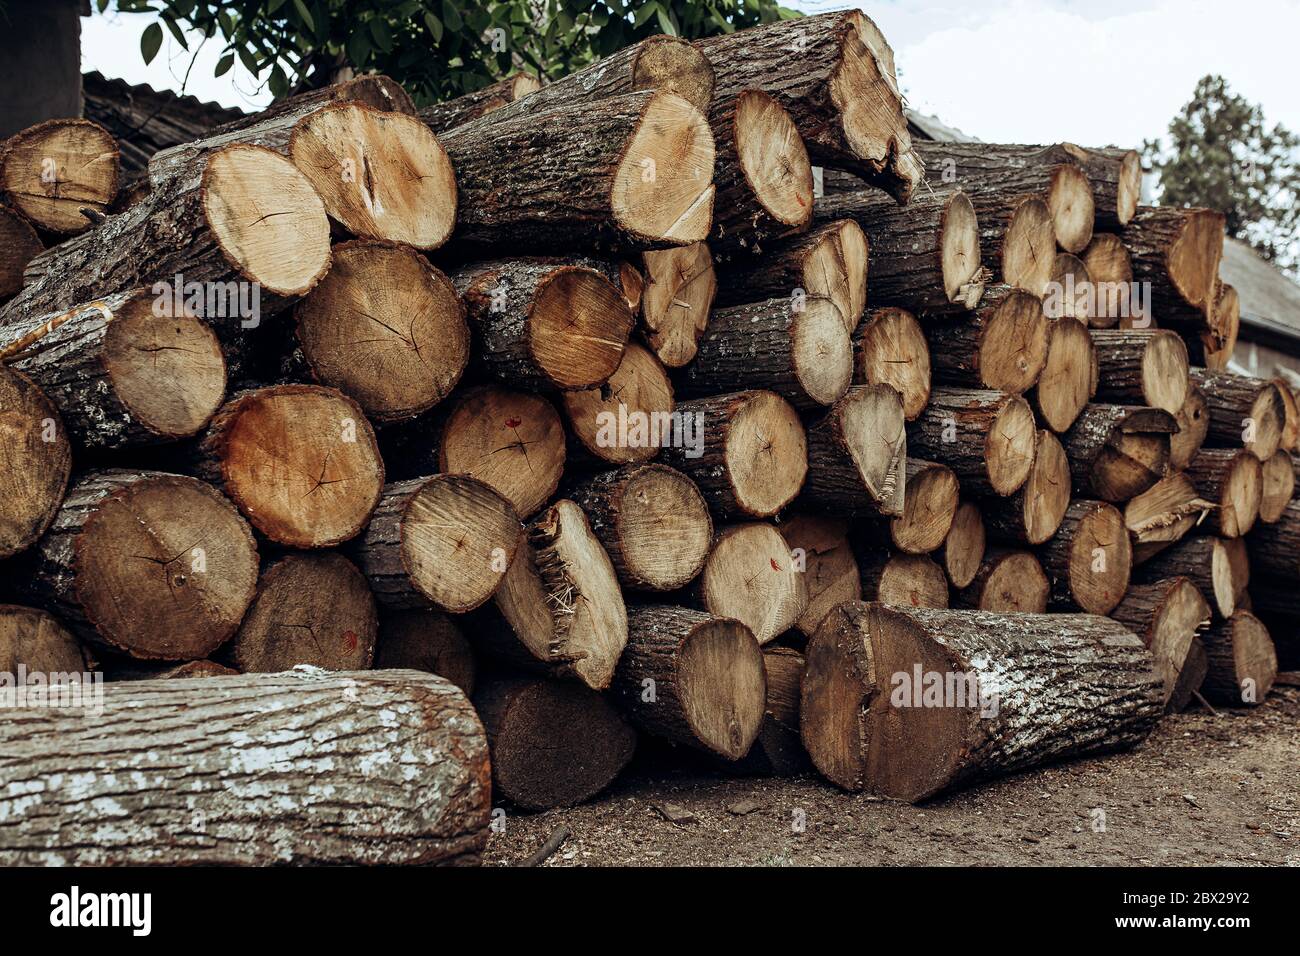 Piles of wooden boards in the sawmill, planking.  Stock Photo